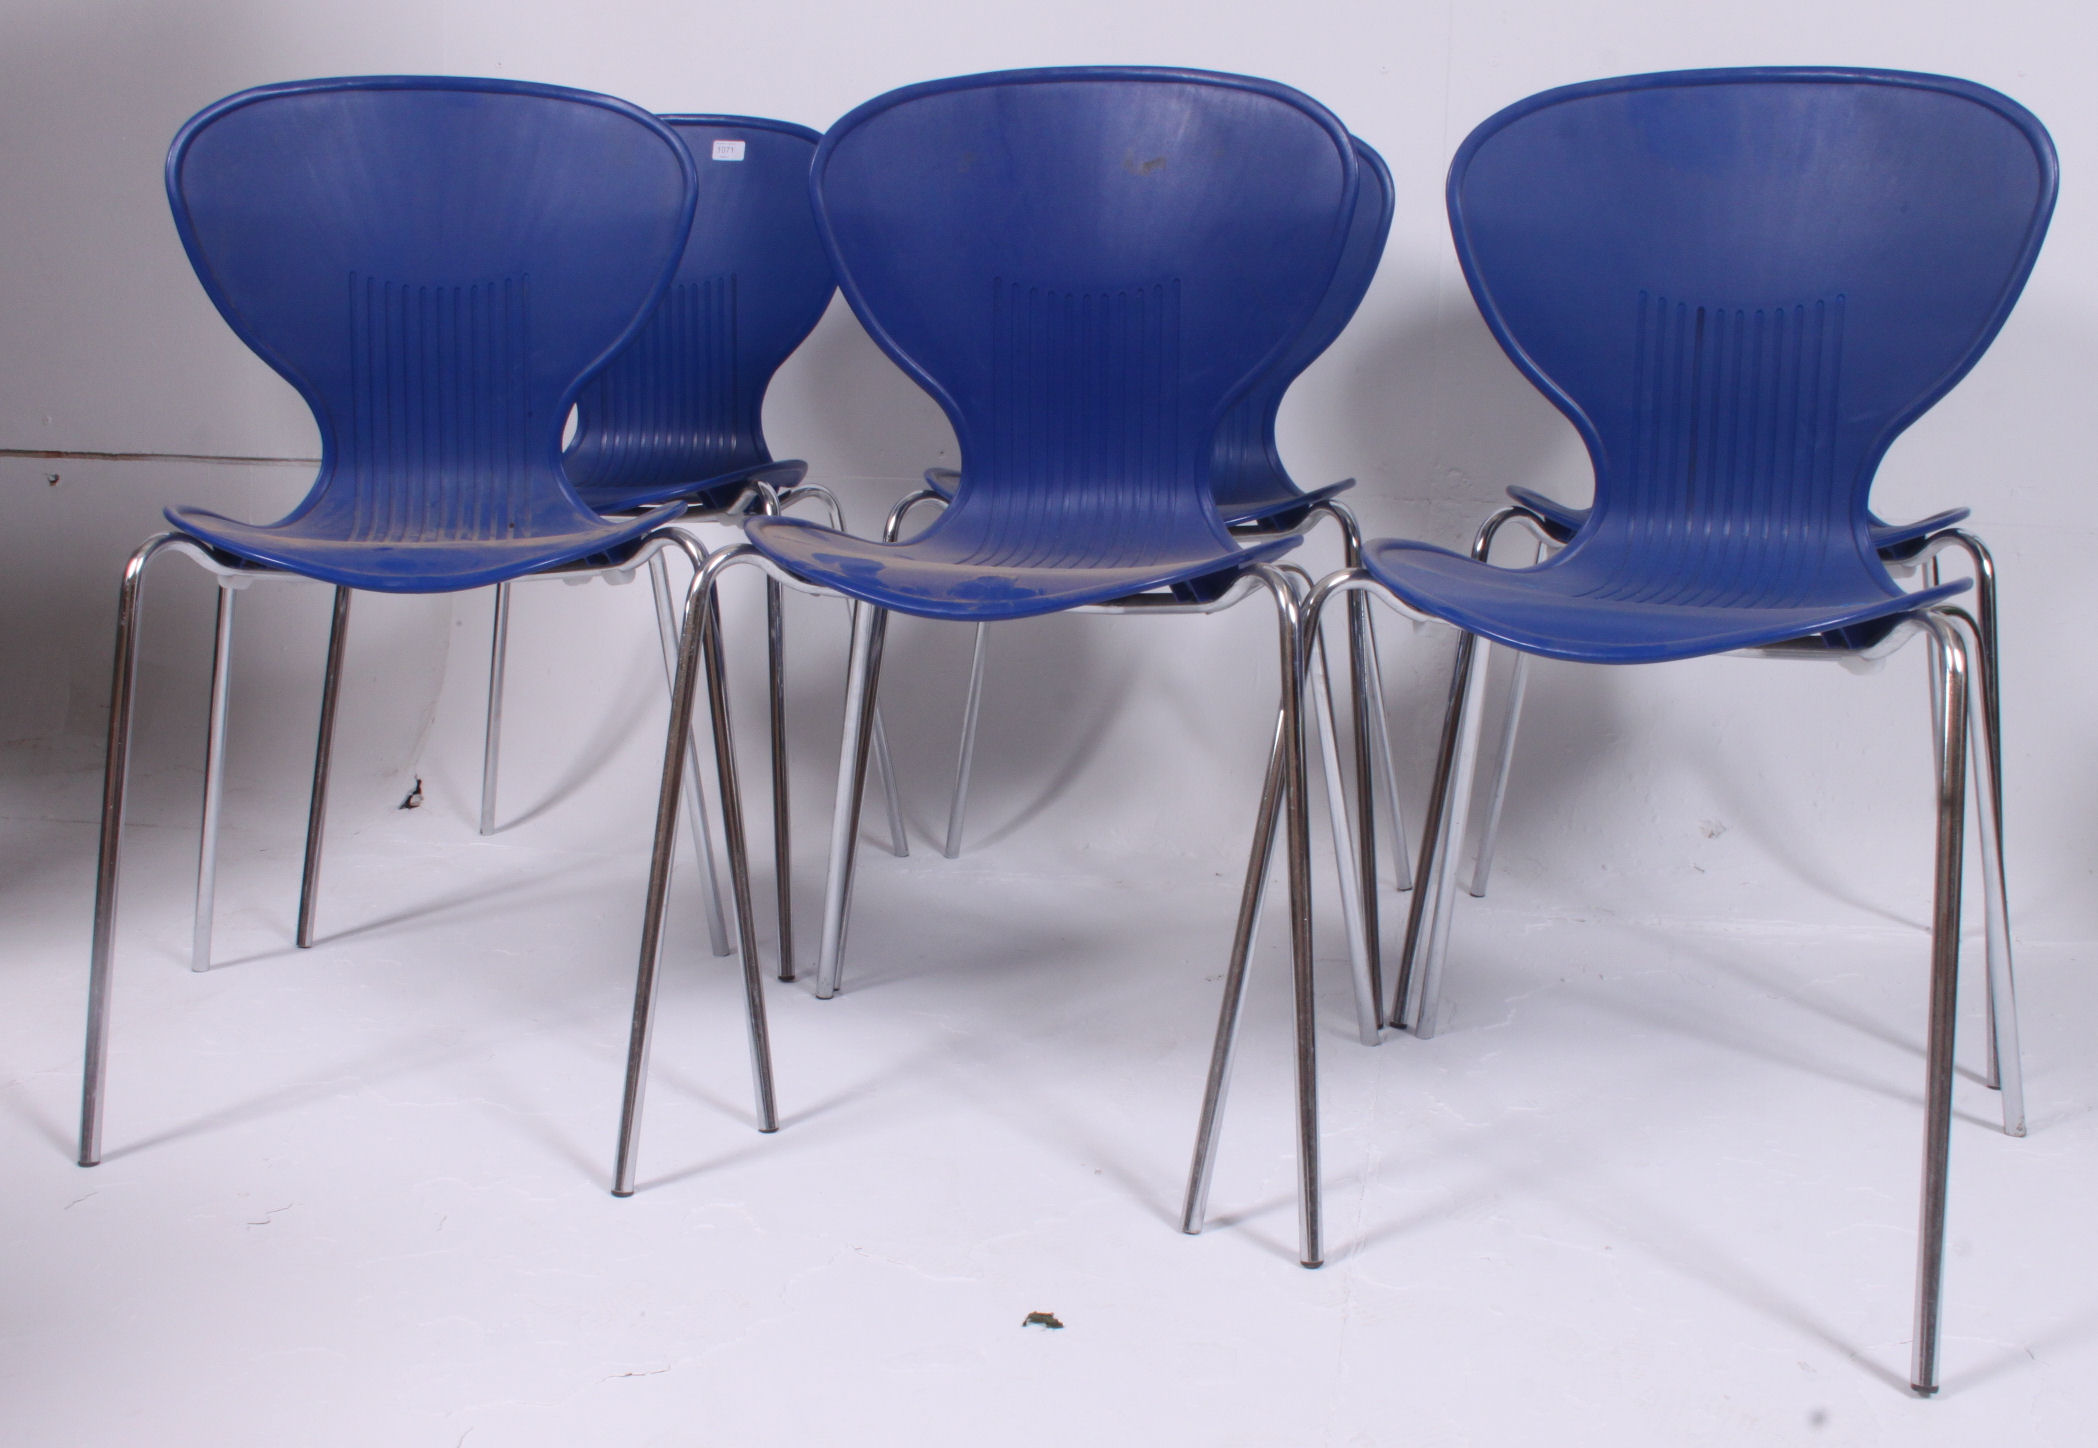 A set of 6 Fritz Hanson style series chairs by Frovi.